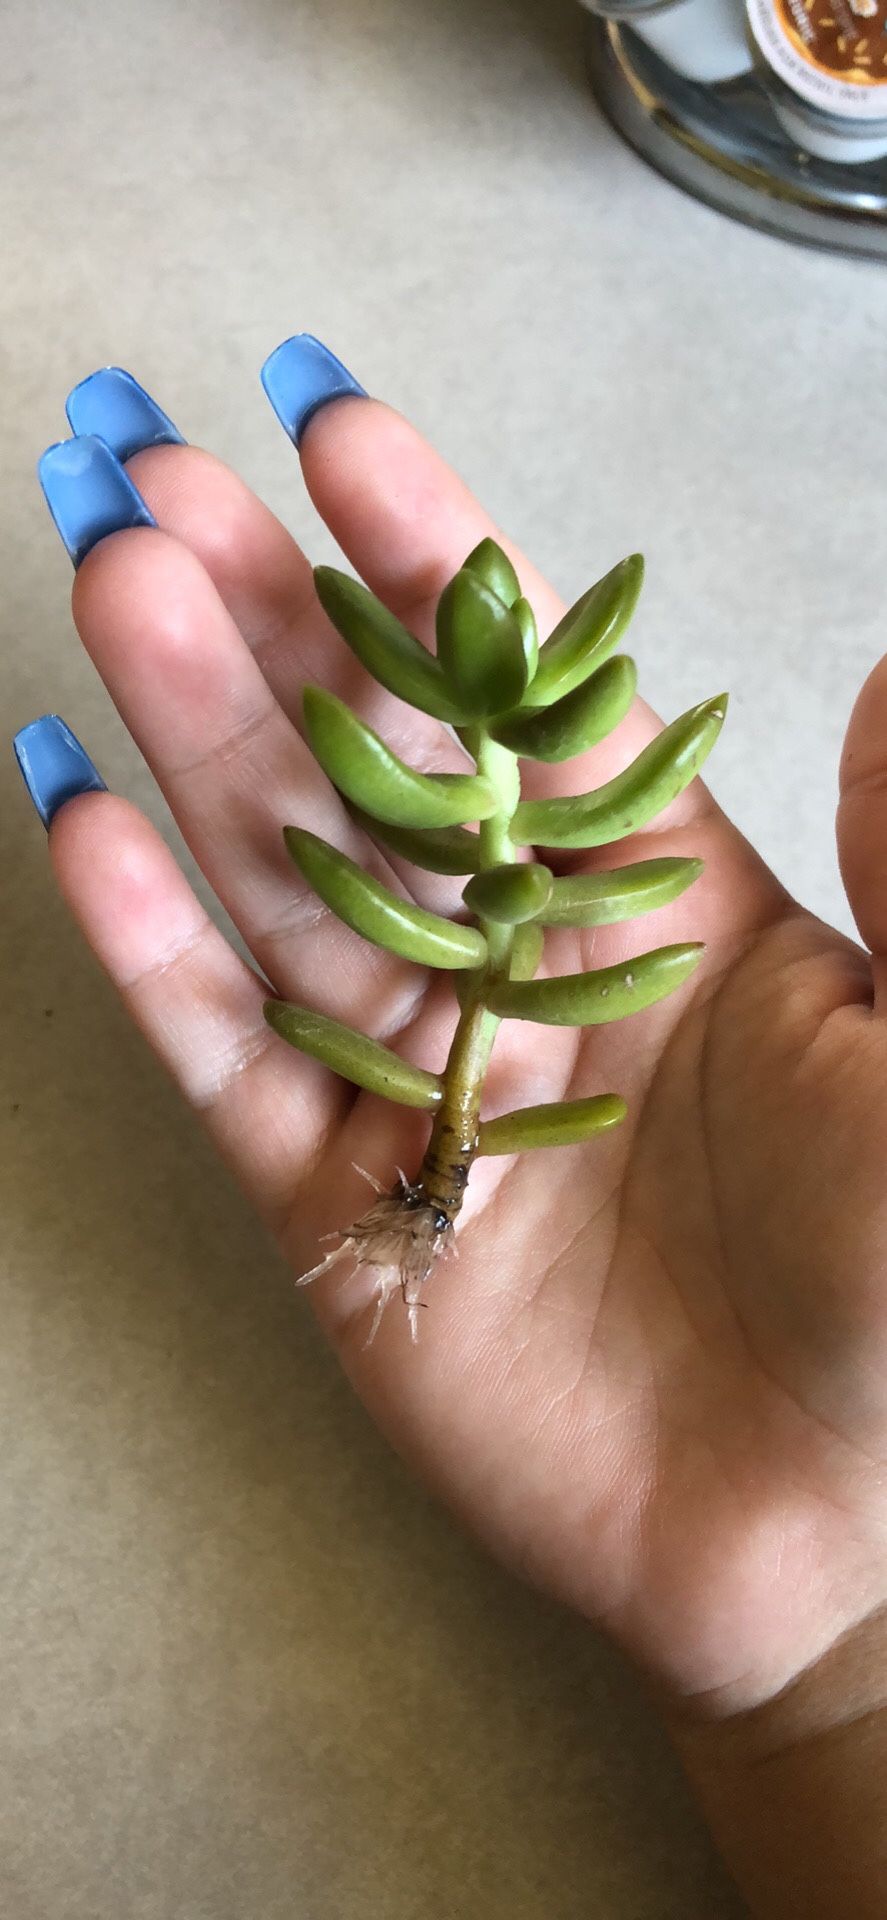 Rooted plant cutting